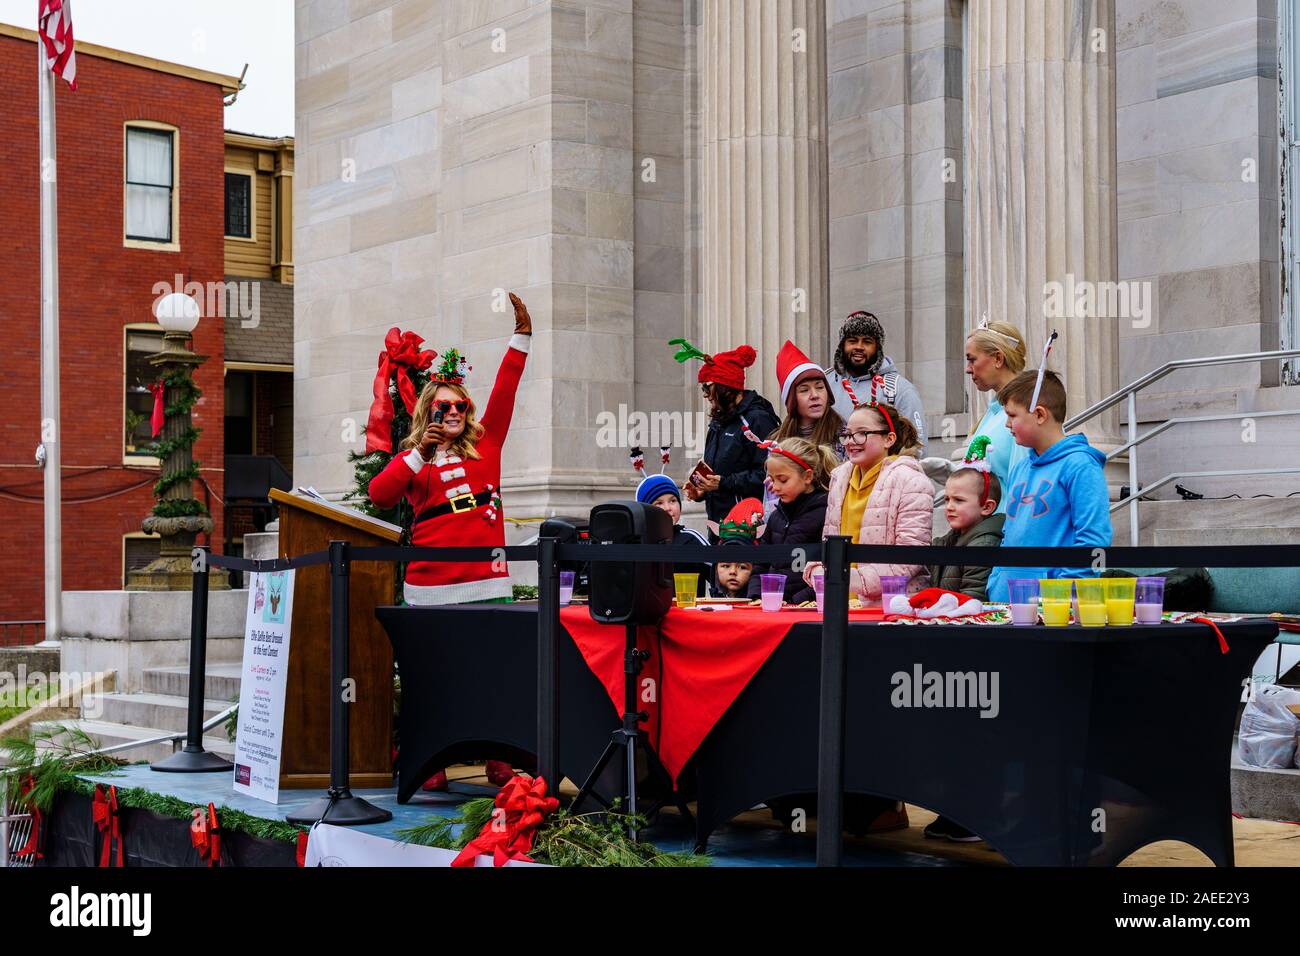 Gettysburg, PA / USA - December 7, 2019:  Children participate in Christmas Cookie eating contest on the steps of the public library in the downtown d Stock Photo